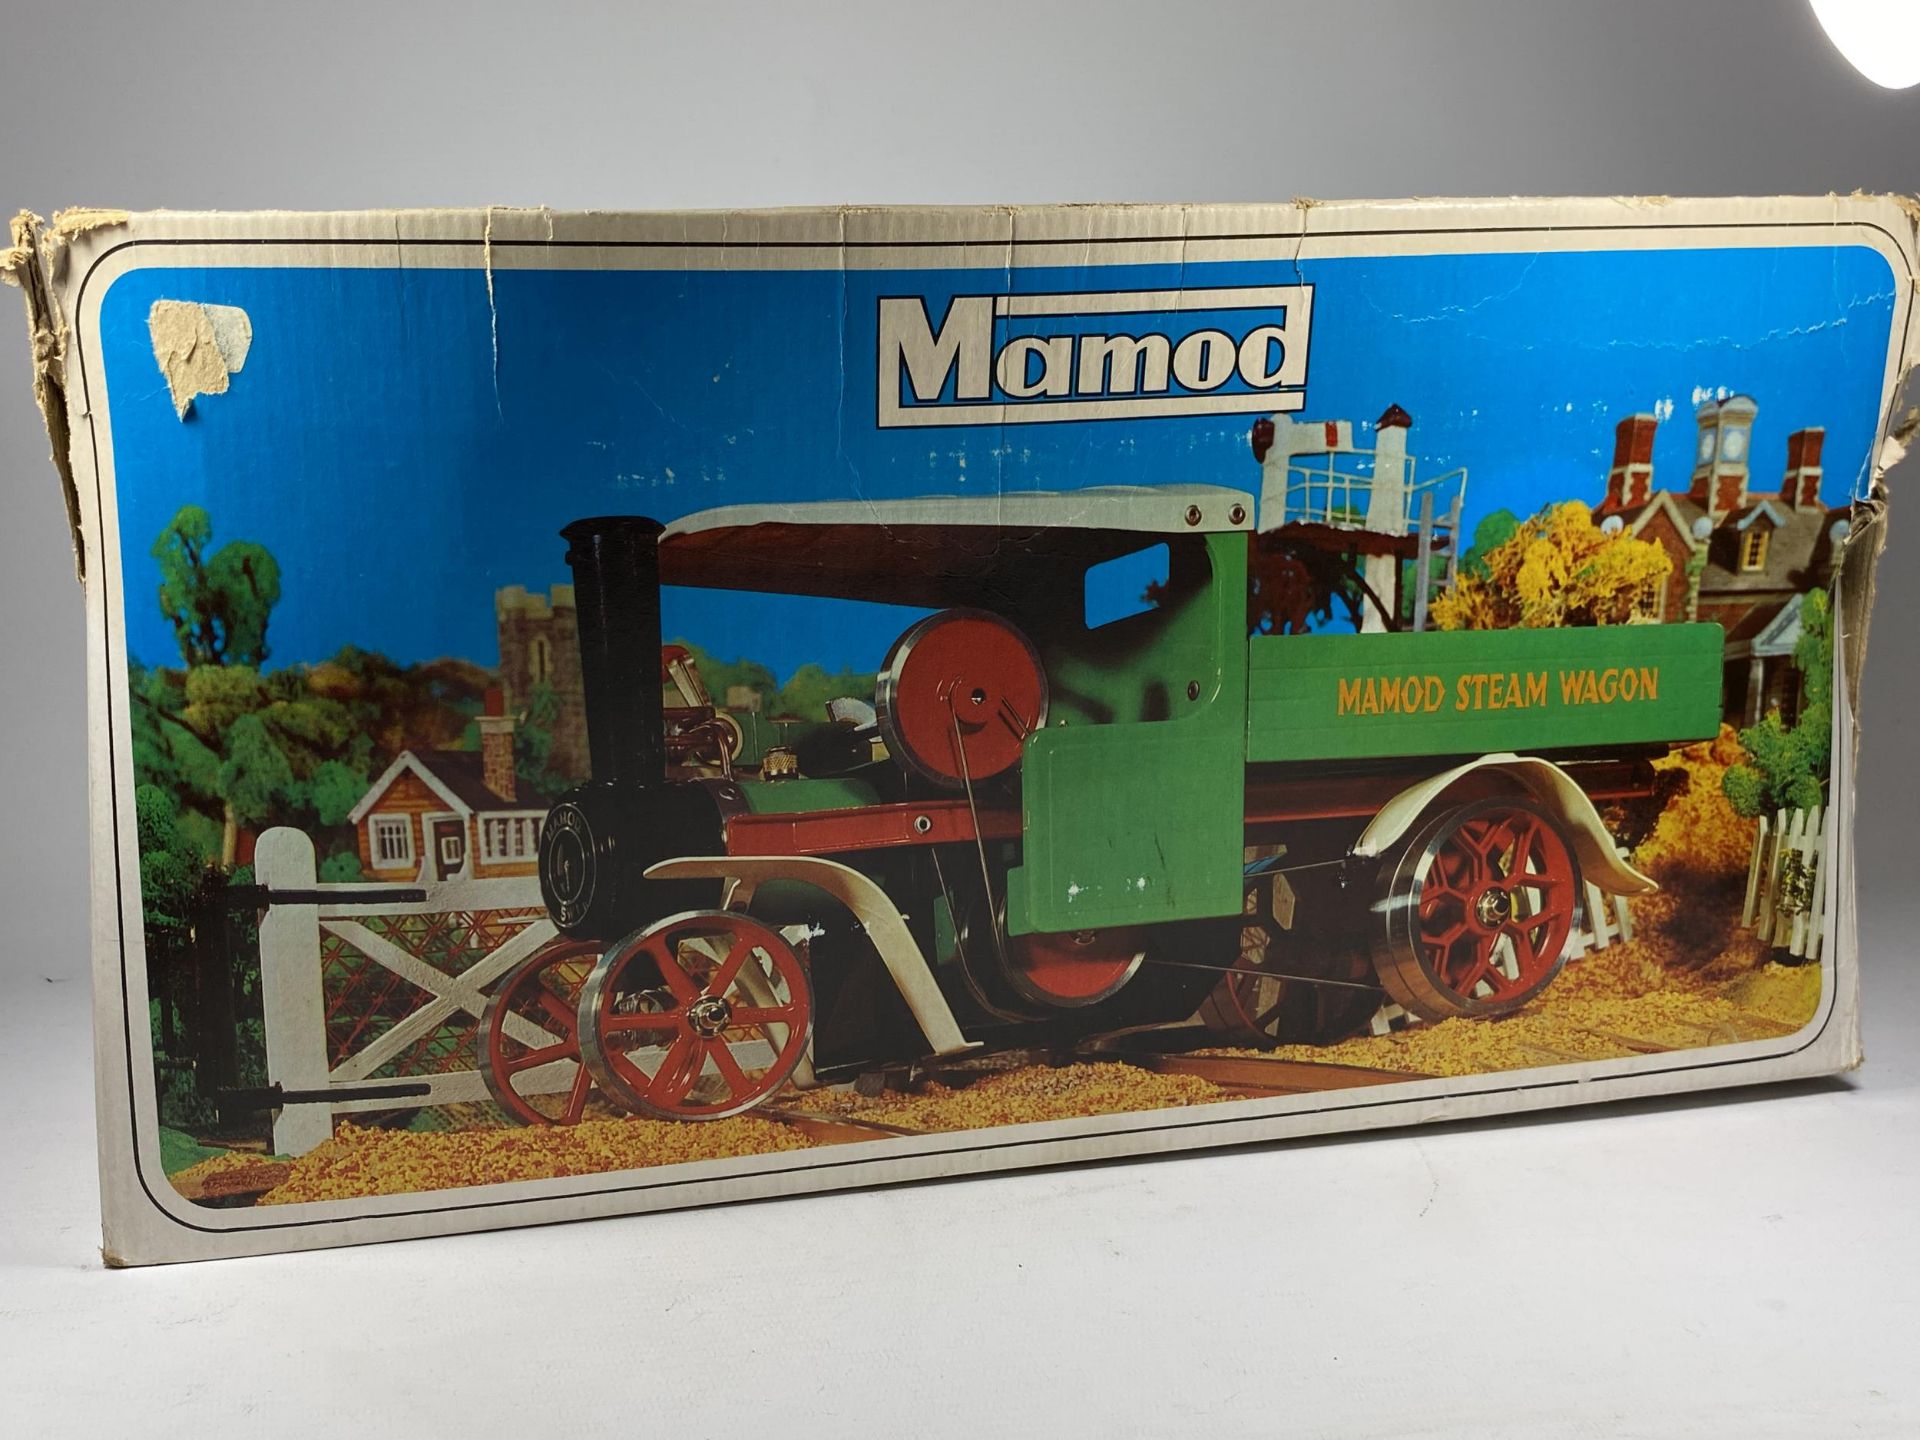 A VINTAGE BOXED MAMOD S1 LIVE STEAM WAGON - Image 7 of 8